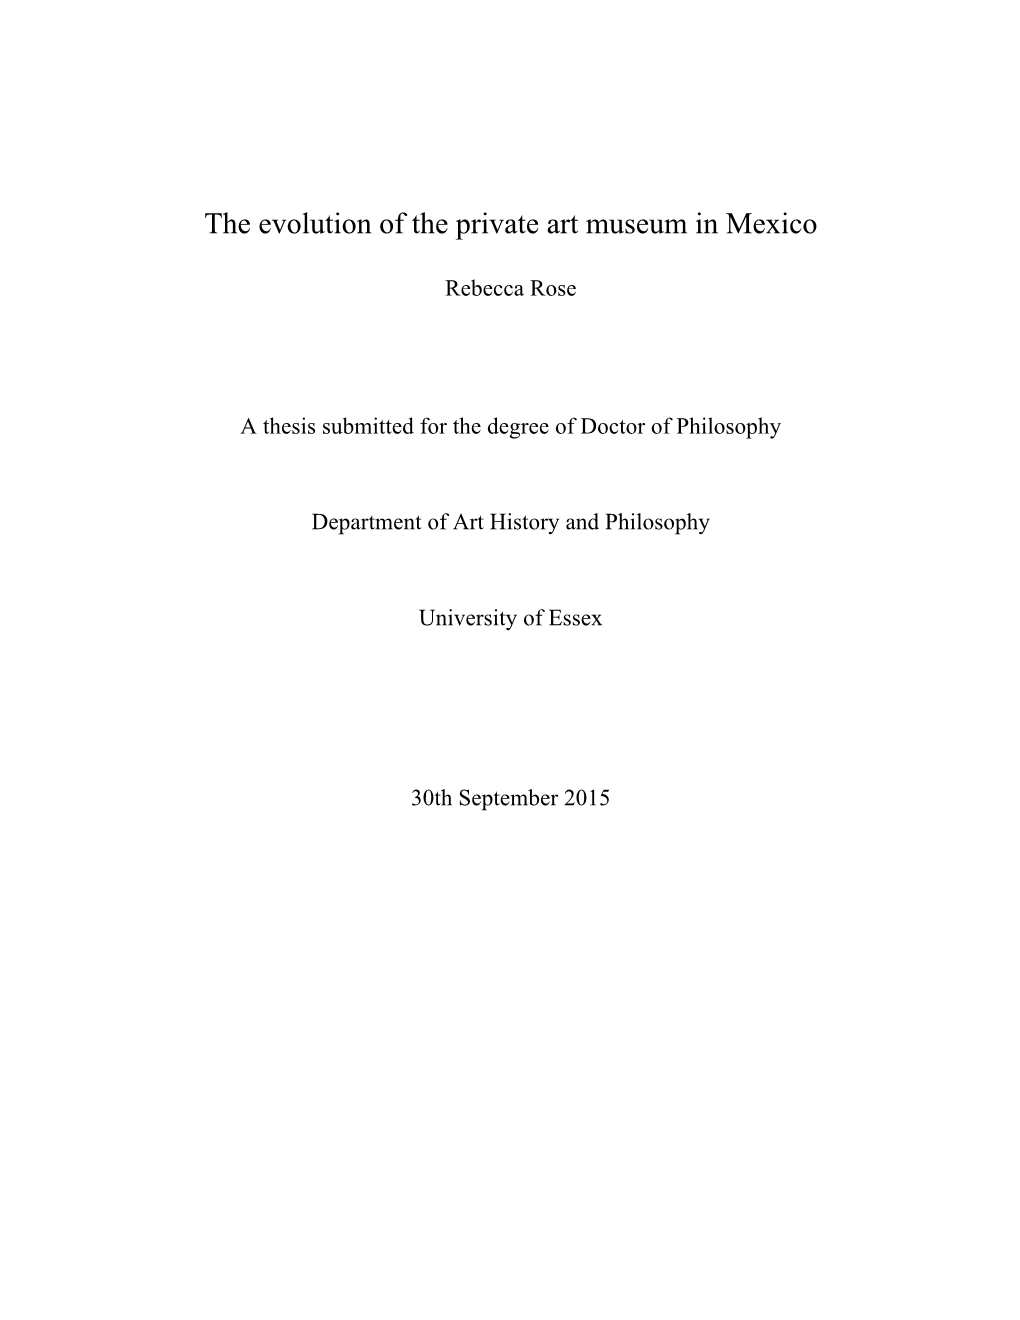 The Evolution of the Private Art Museum in Mexico